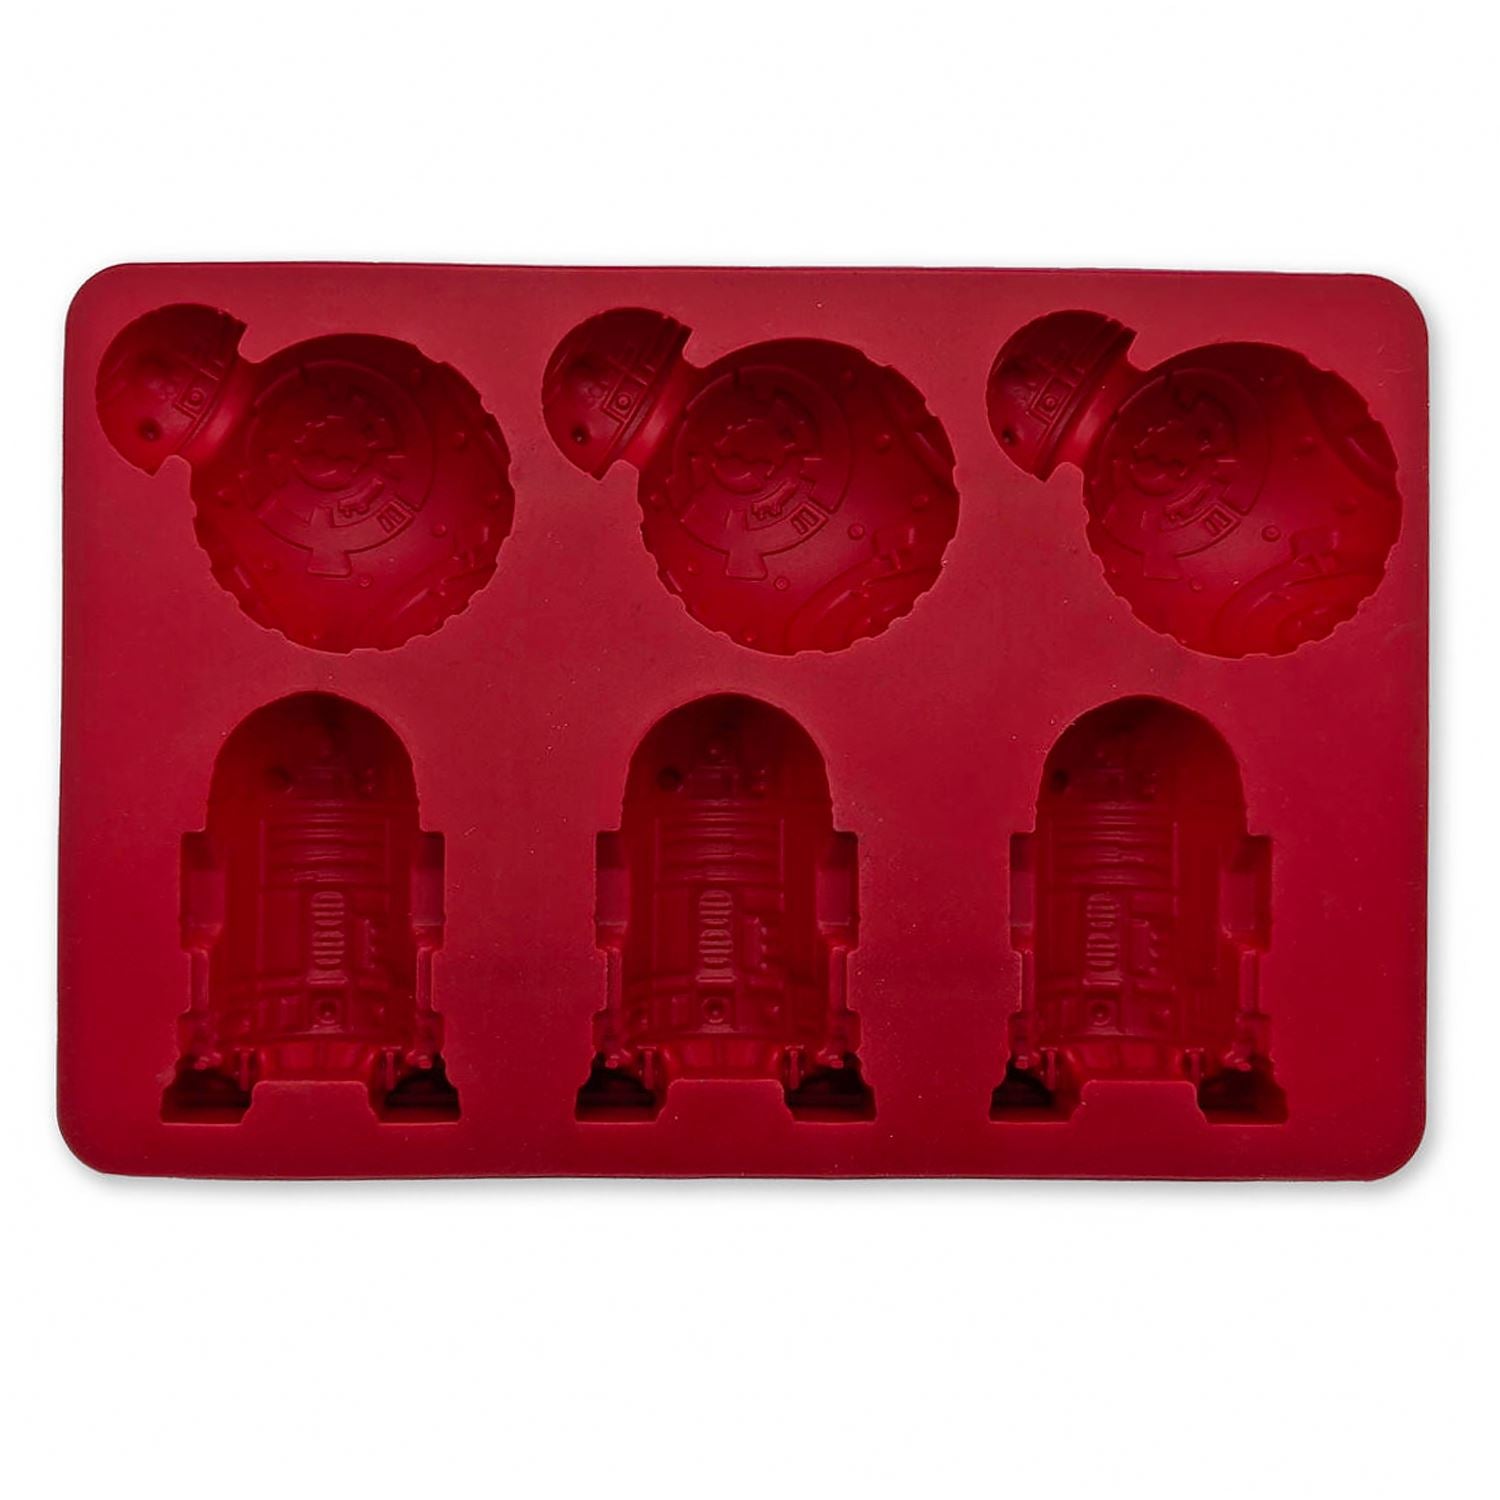 Star Wars SILICONE ICE CUBE TRAY R2-D2 and BB-8 Droid Cold Drink Molds